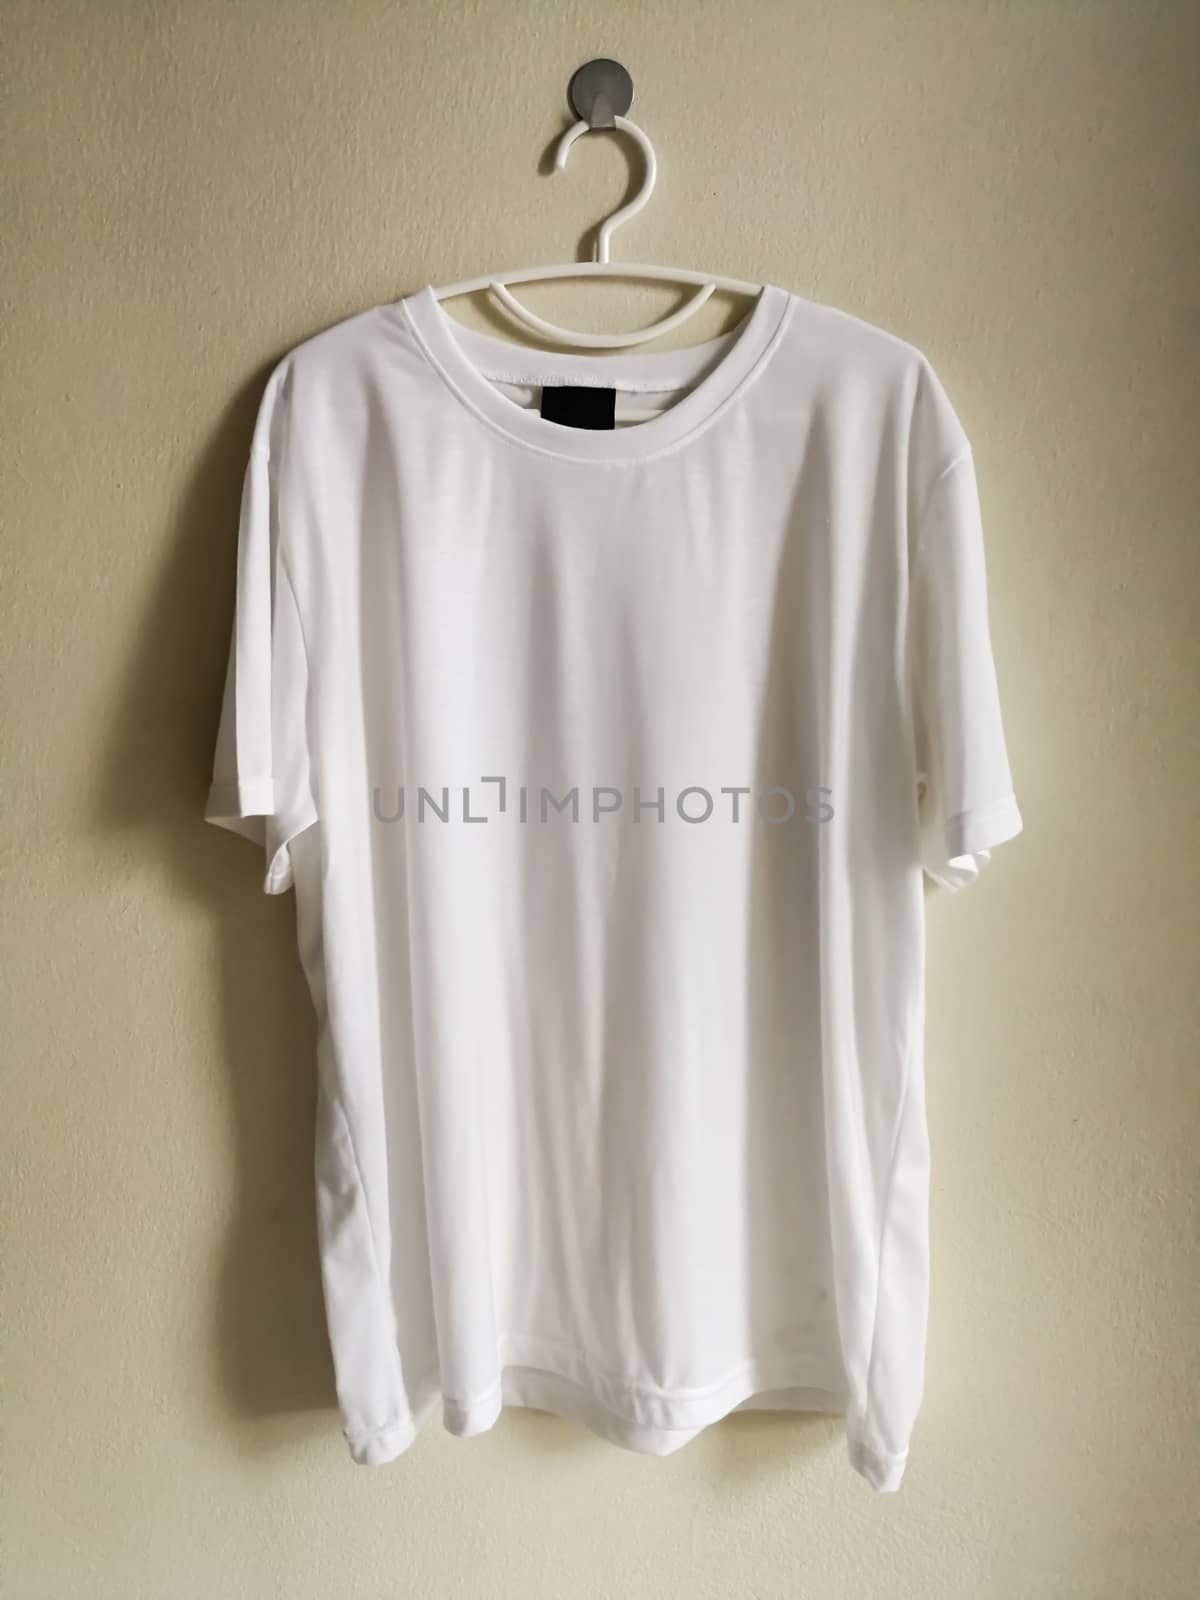 Blank t-shirt hanging on wall. by ronnarong